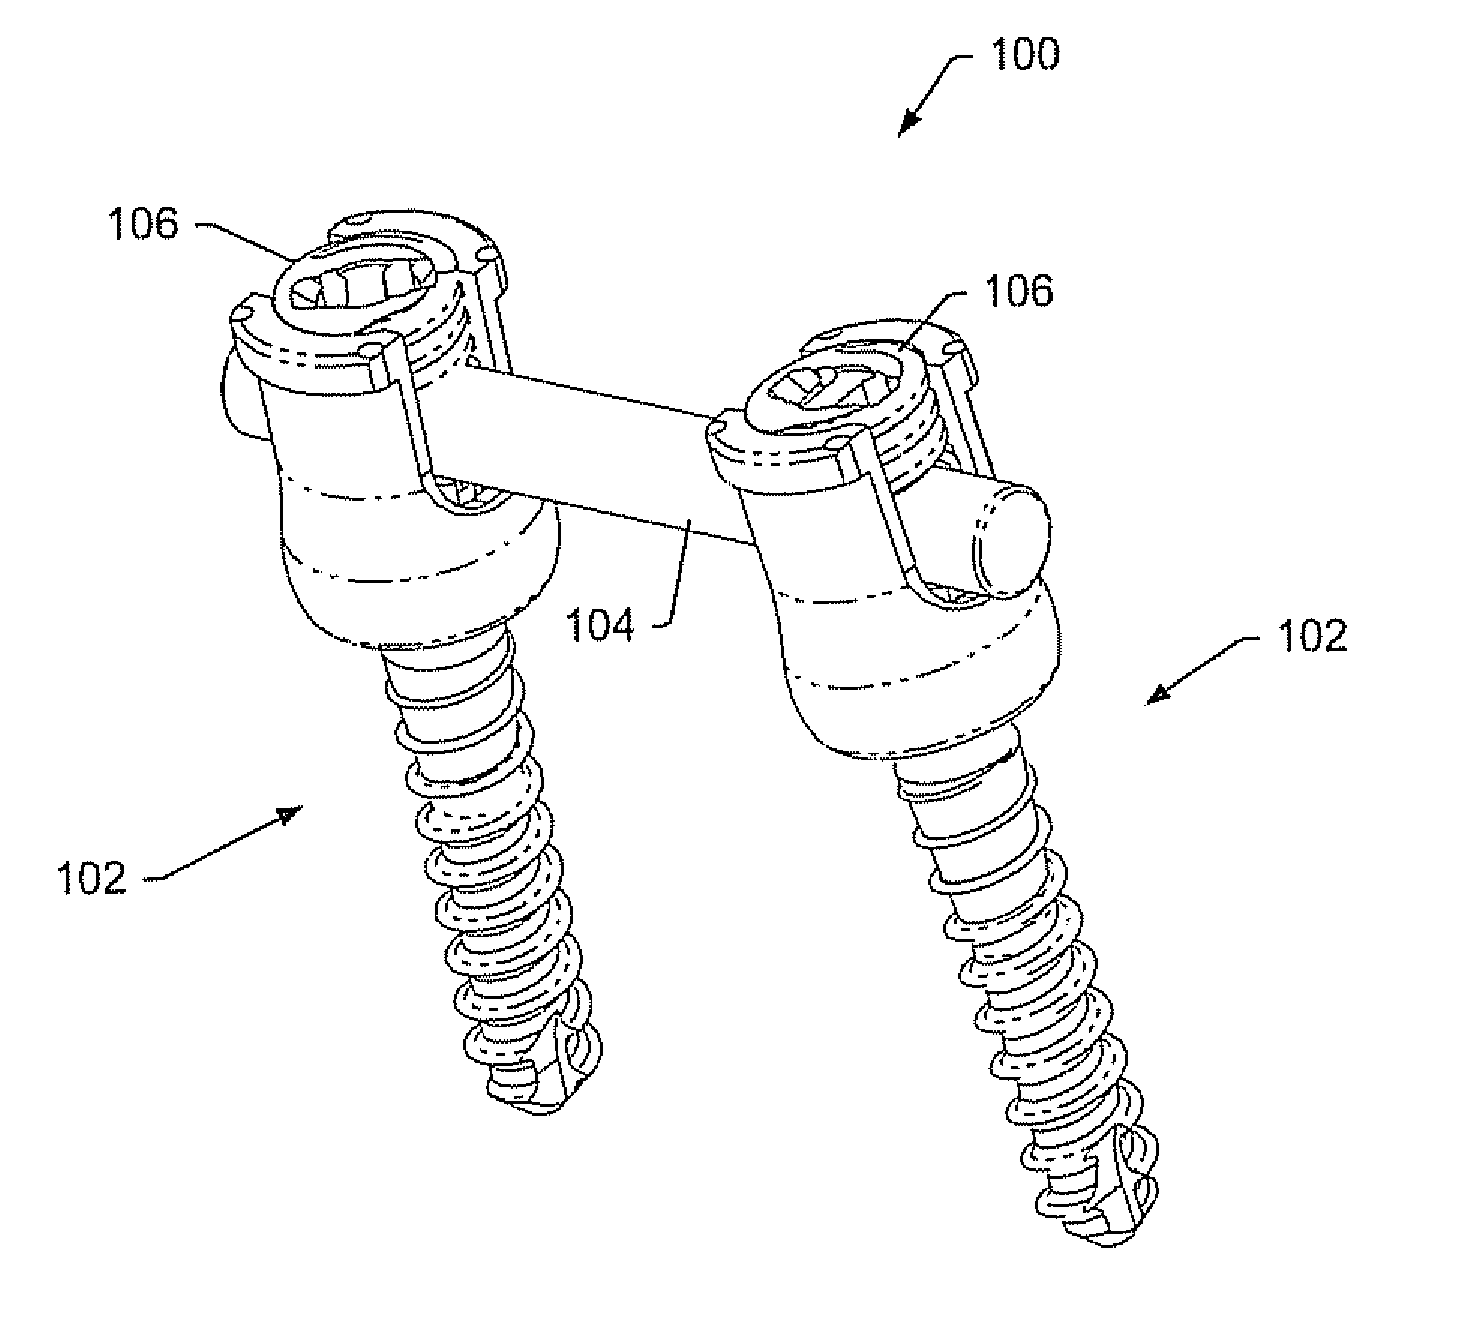 Instruments and methods for reduction of vertebral bodies